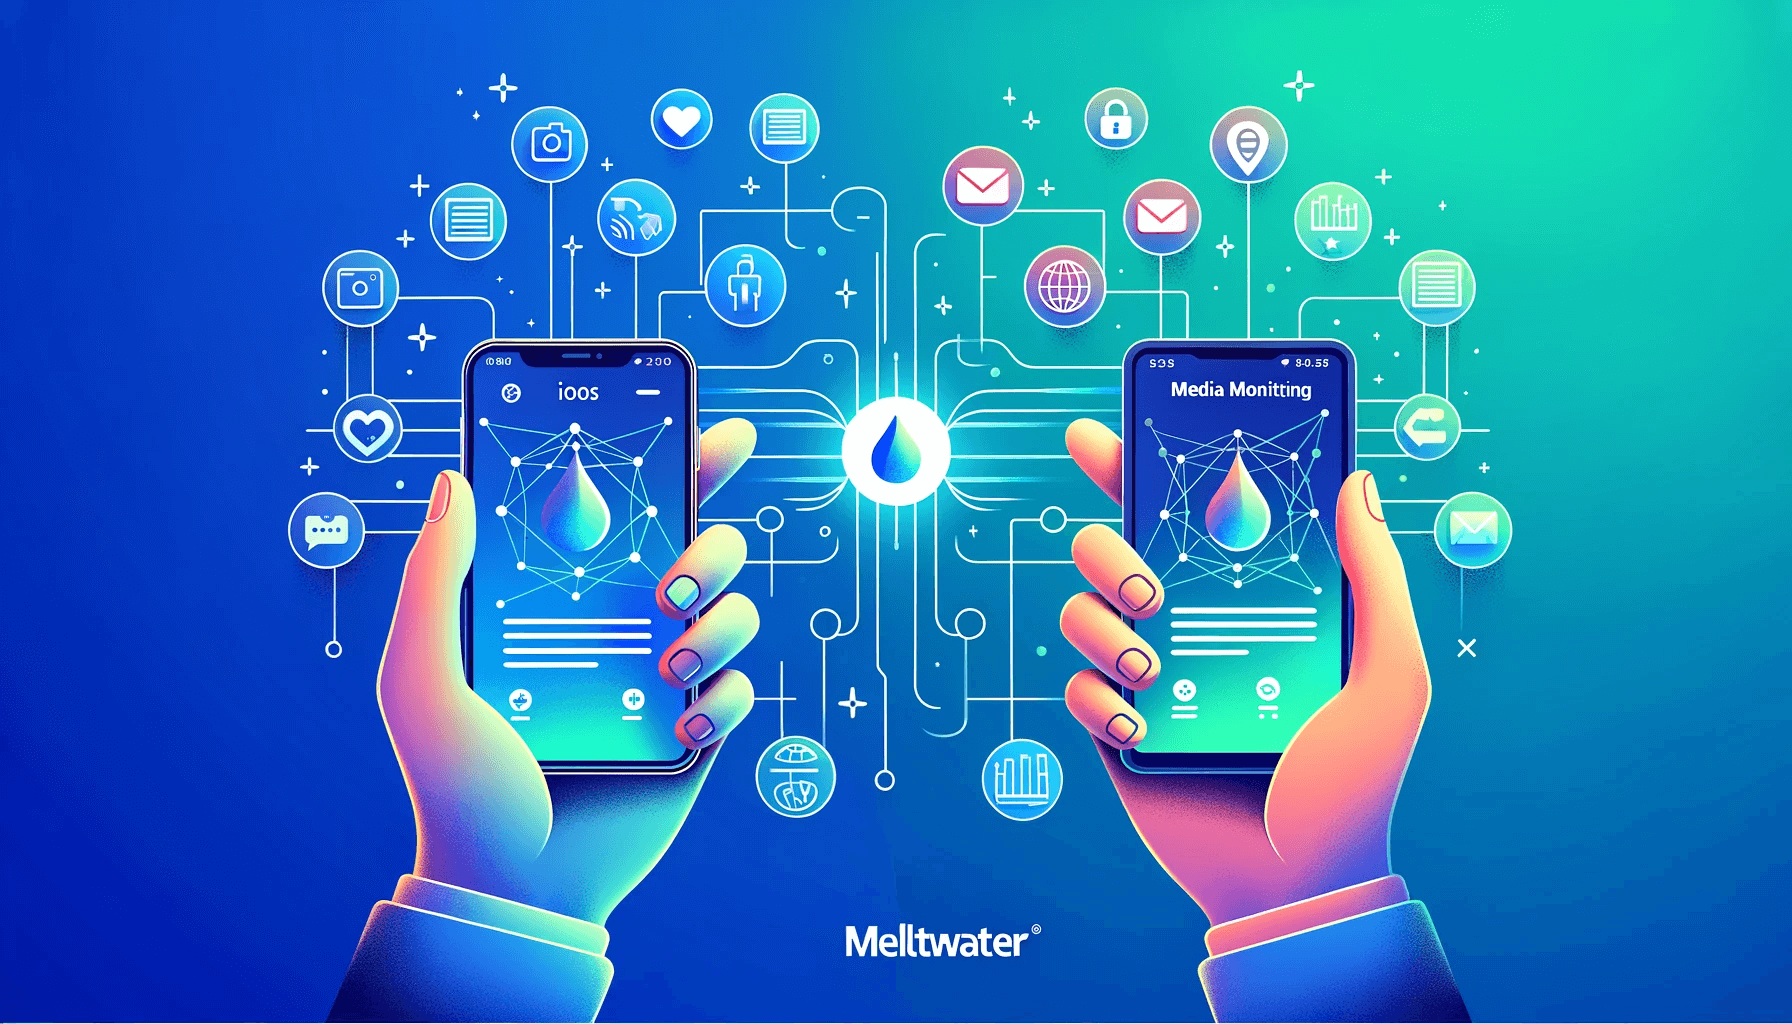 Meltwater mobile applications